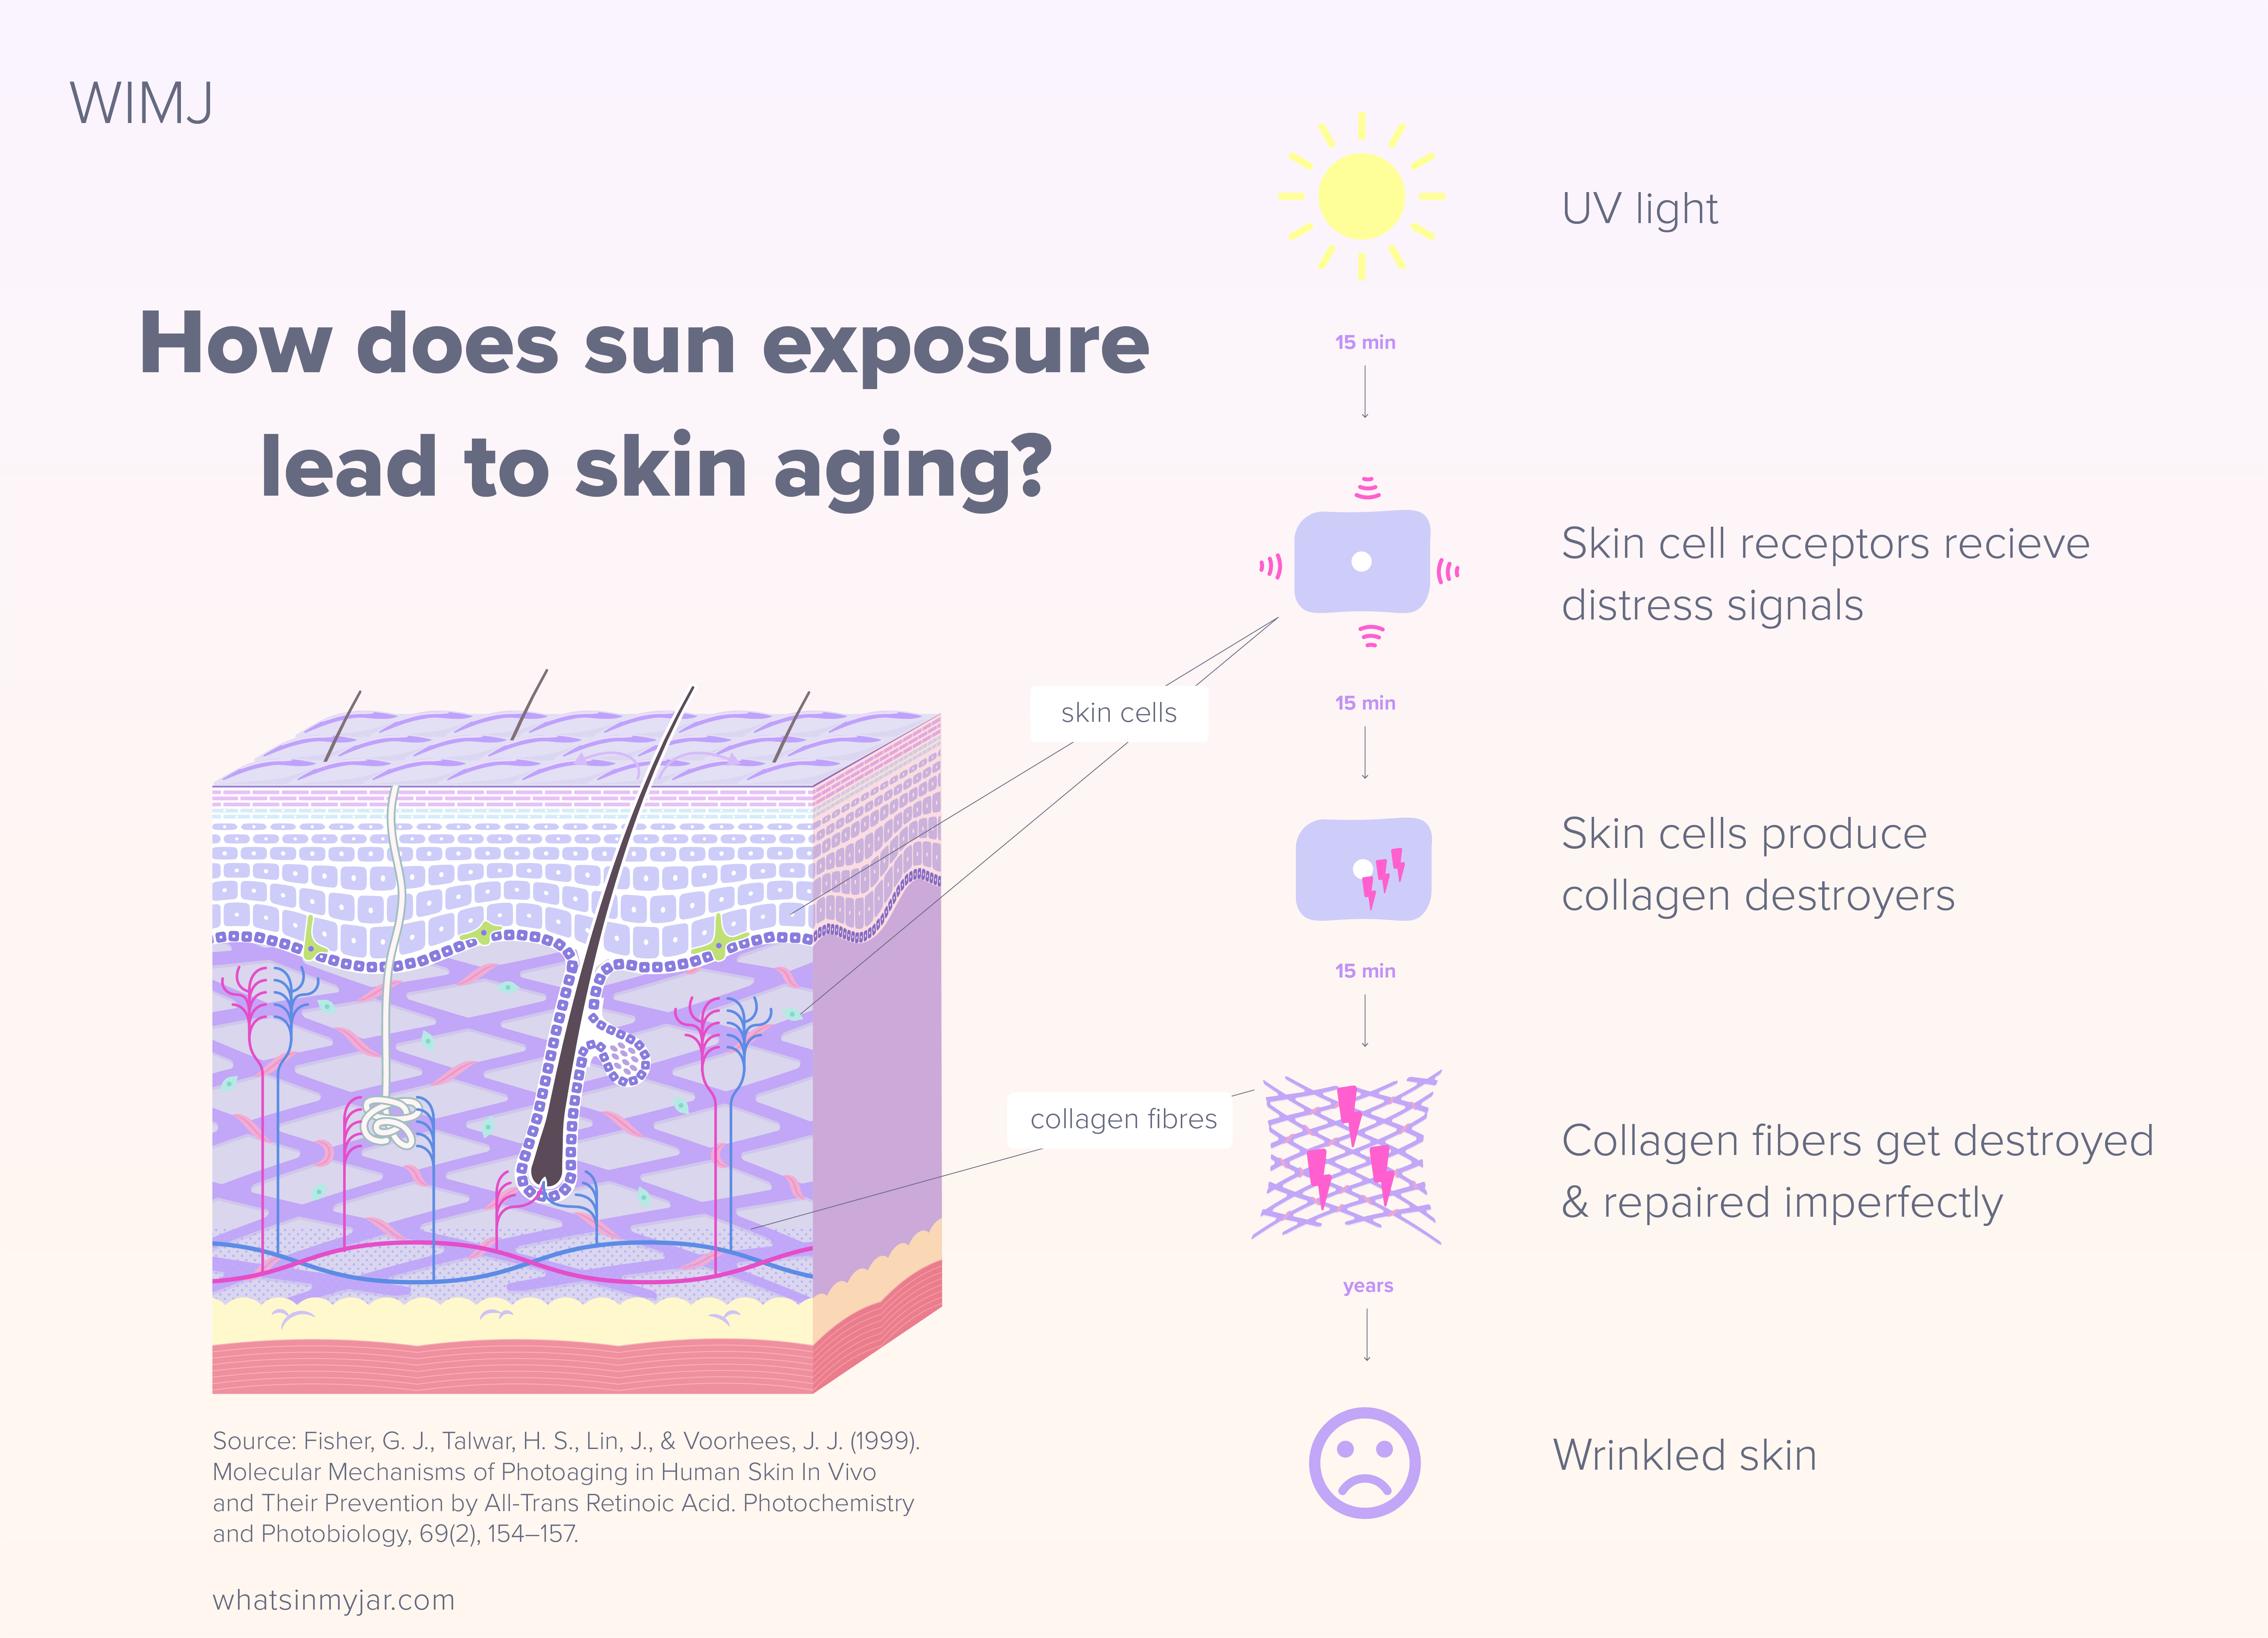 How does sun light lead to skin aging